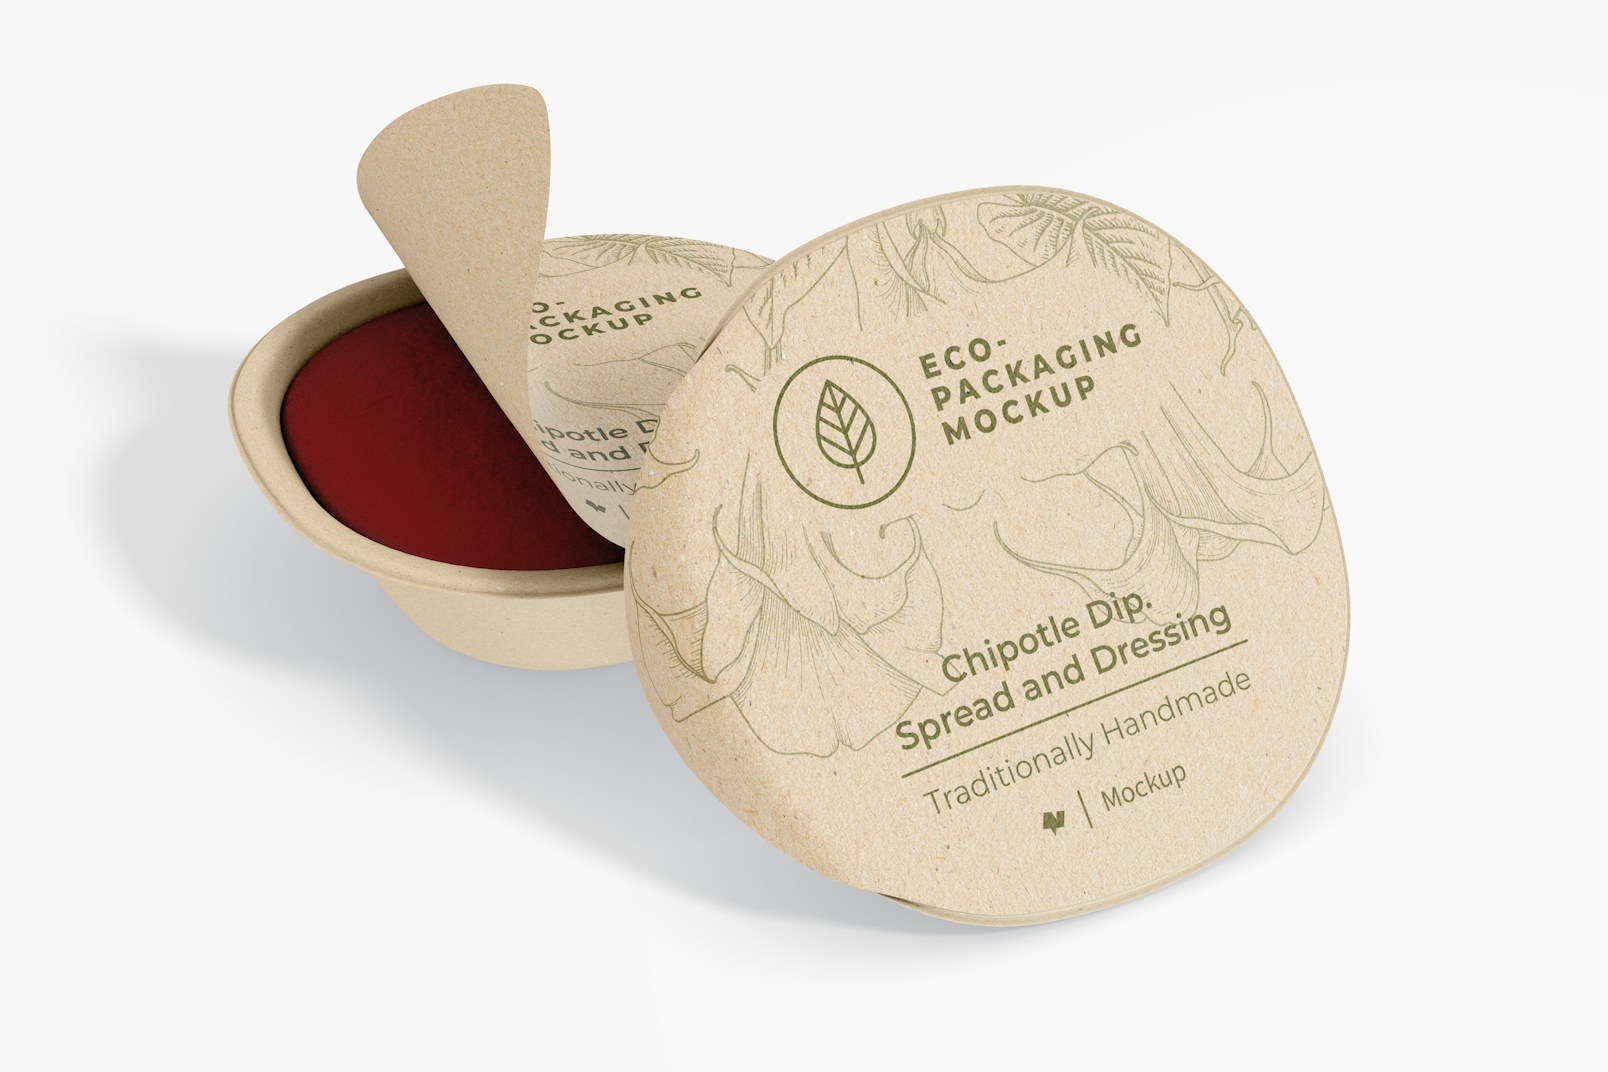 Biodegradable Dipping Sauce Containers Mockup, Opened and Closed